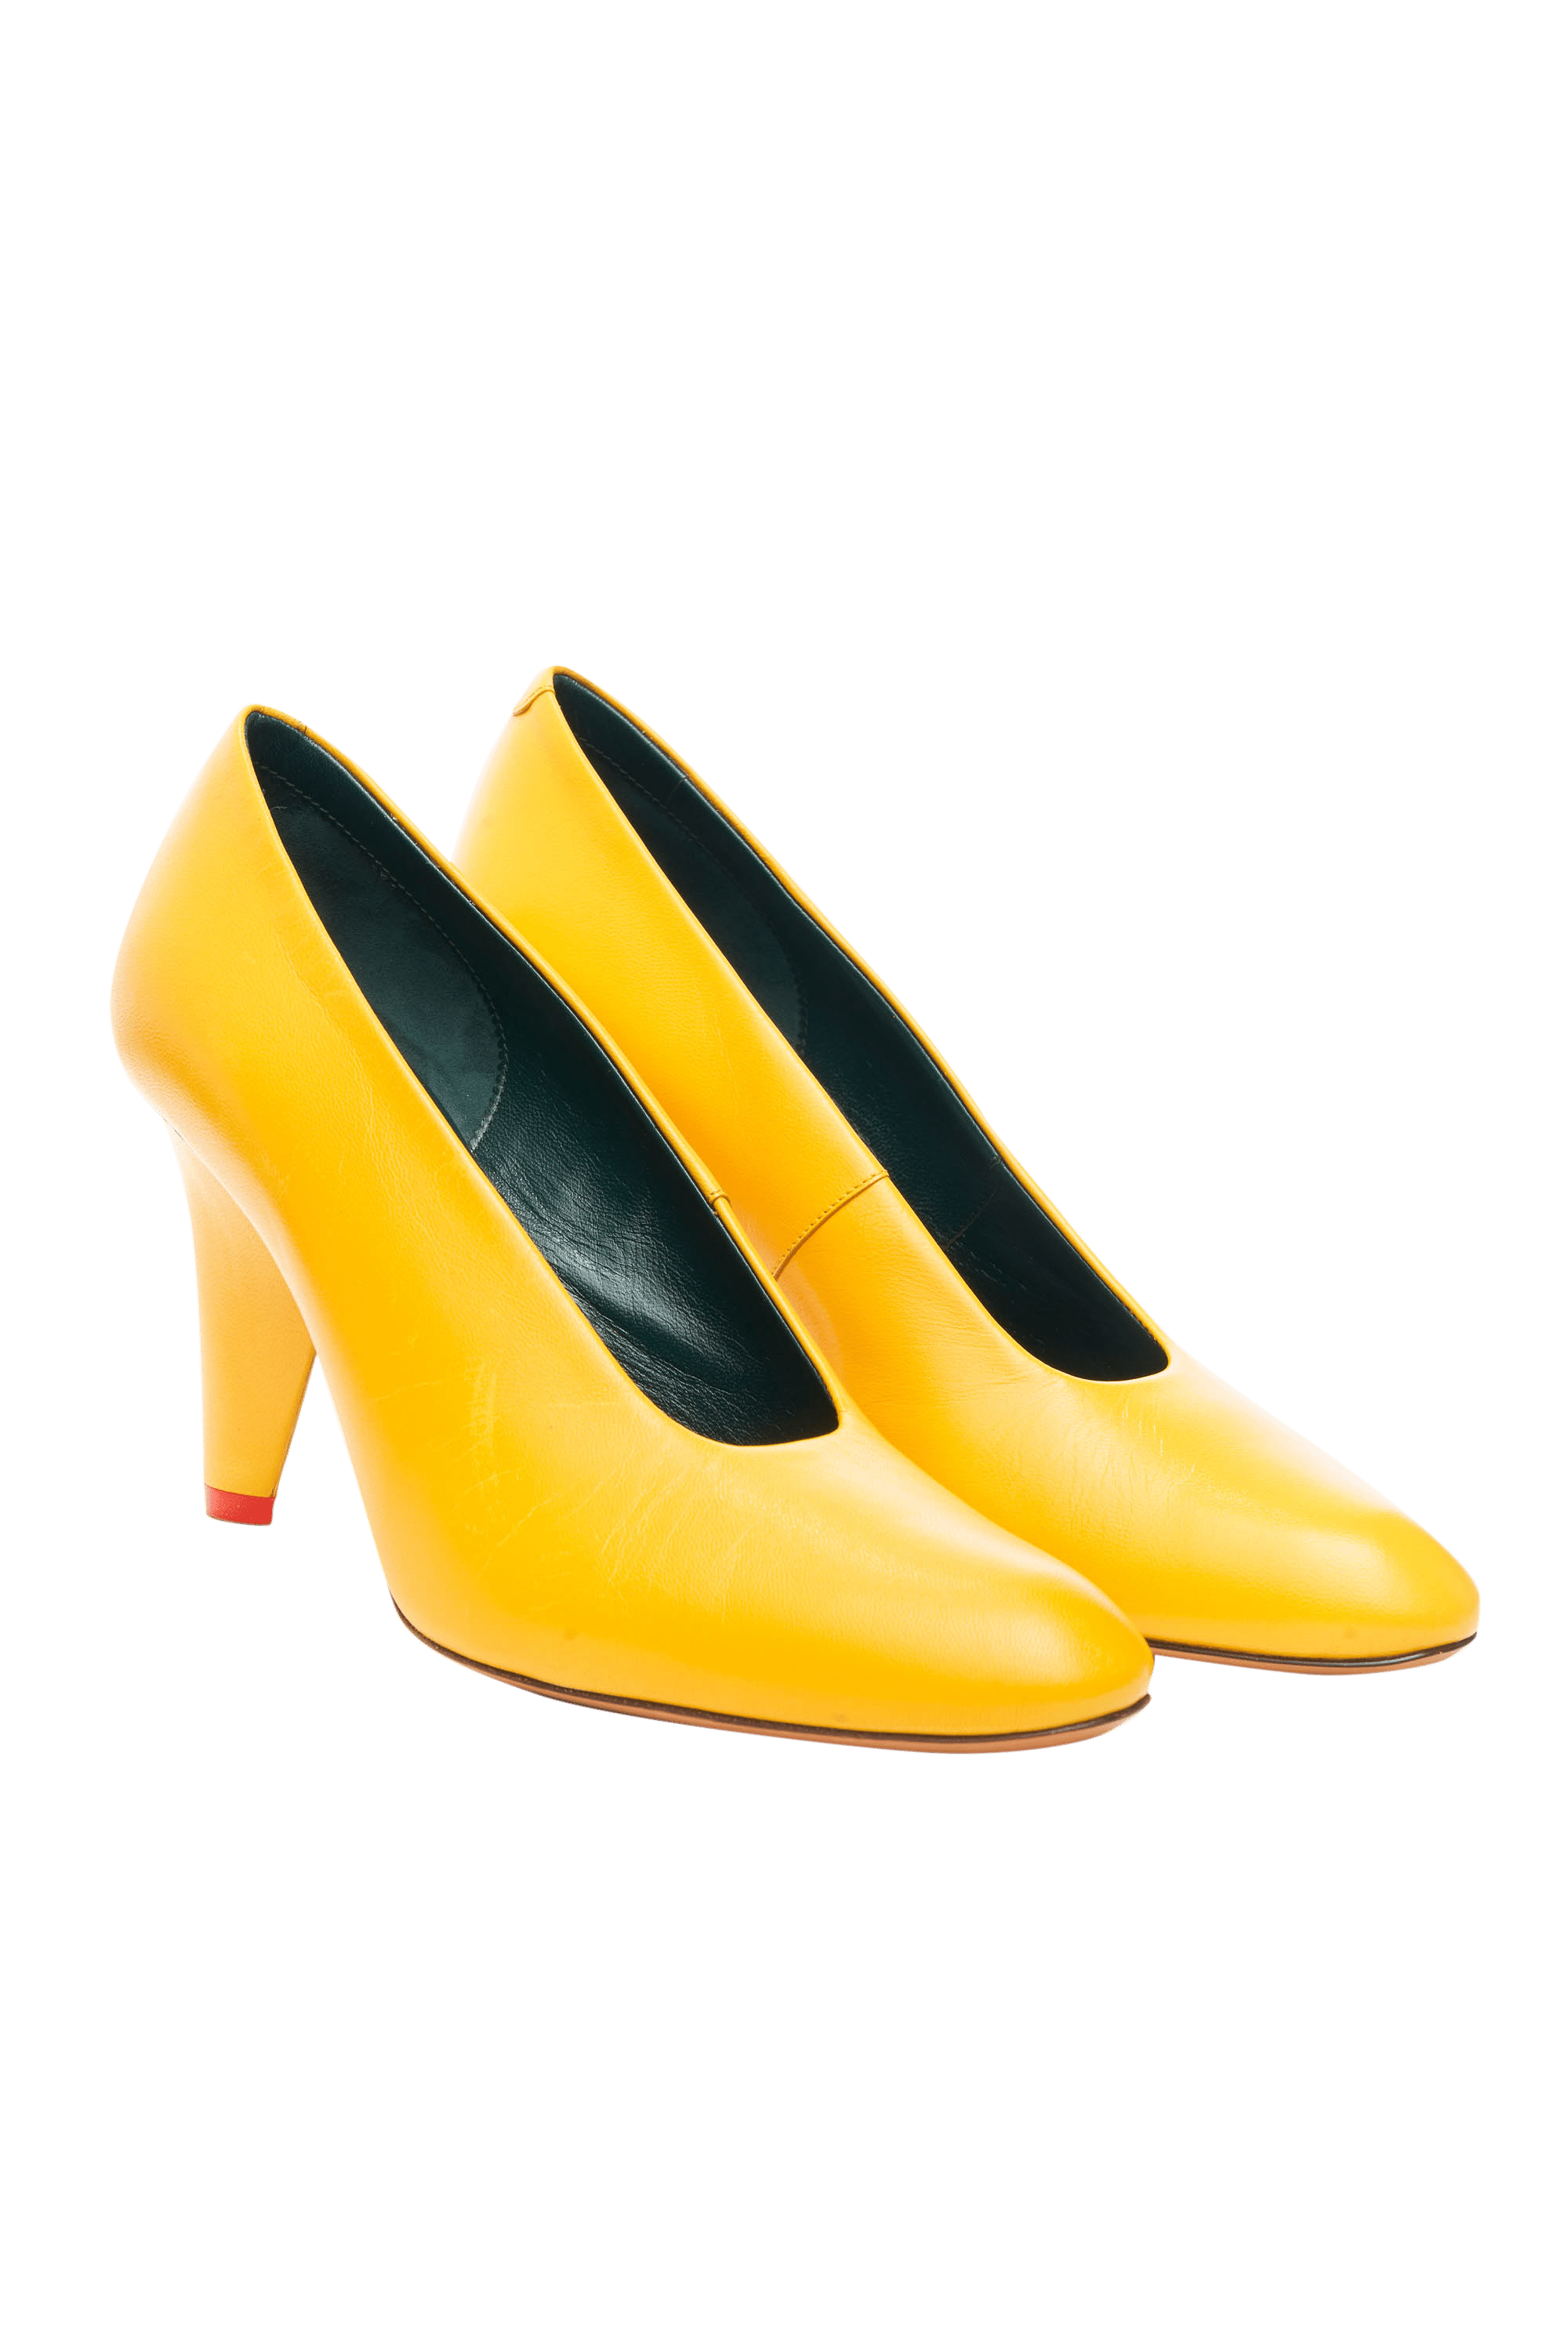 Celine Yellow Pumps with Red Heel Size 36 - Foxy Couture Carmel